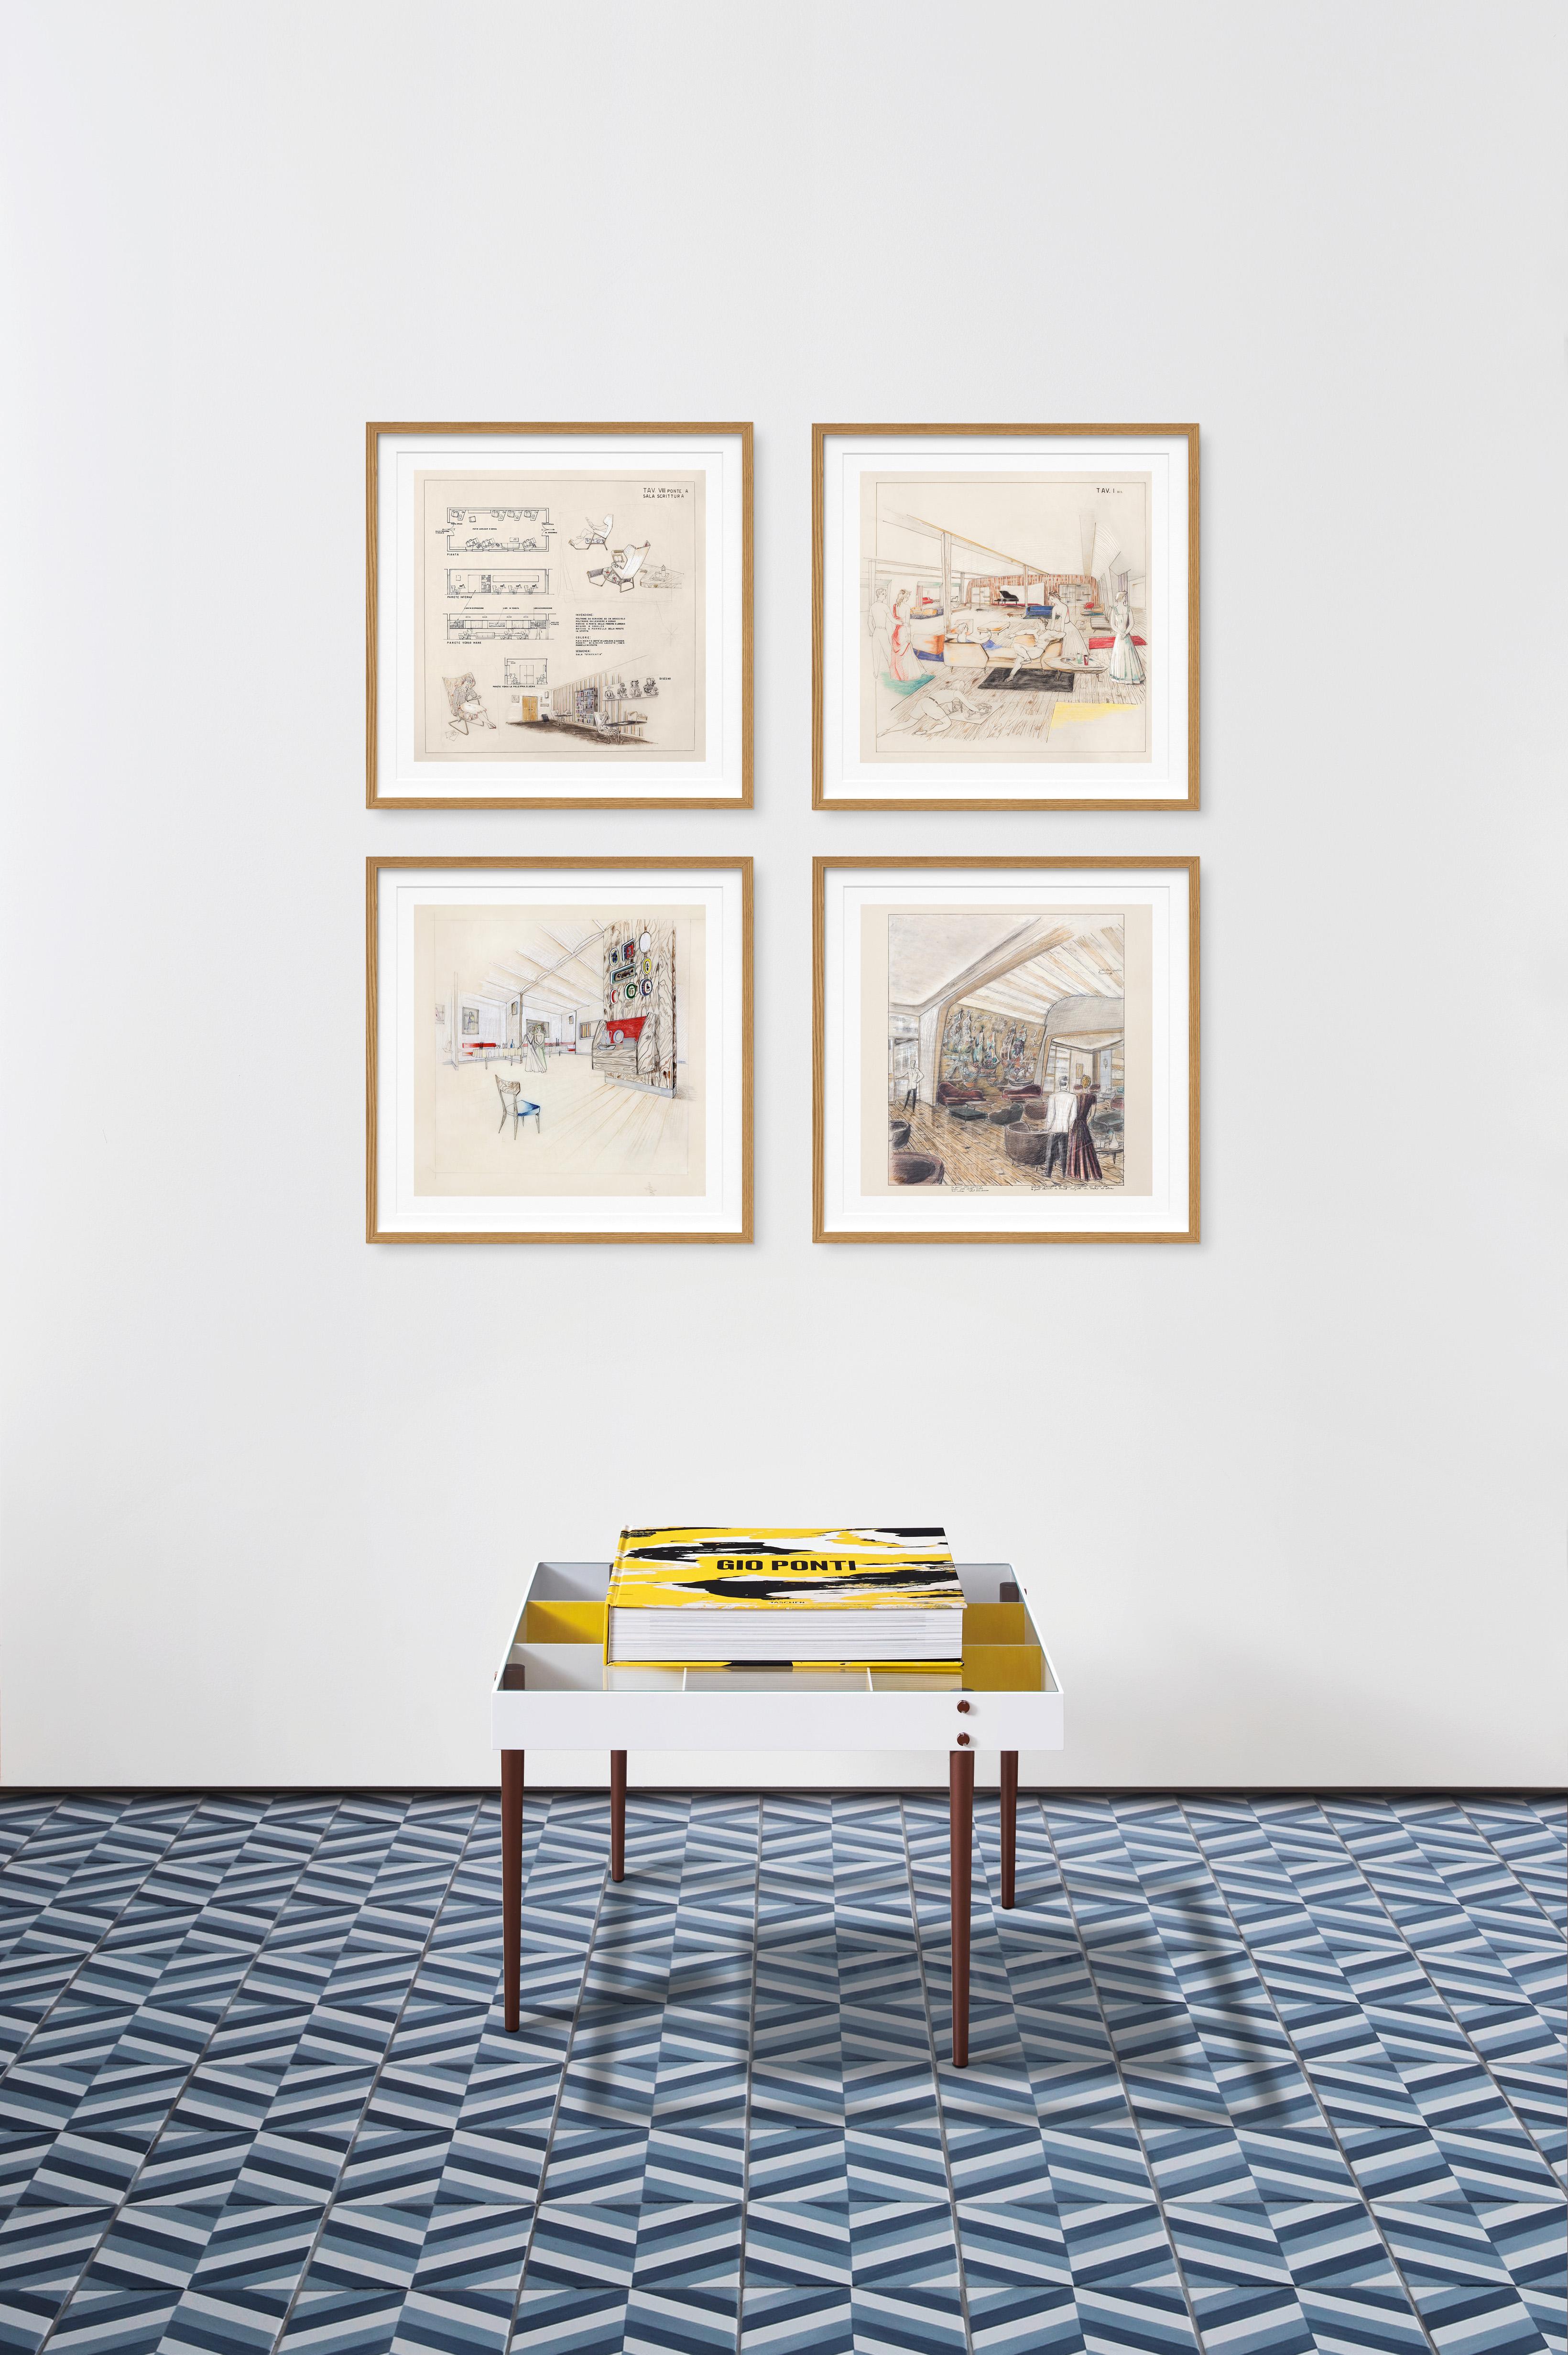 This numbered Art Edition of 1,000 copies (Hardcover book, 36 x 36 cm, 572 pages) is accompanied by an exclusive, square format reproduction of the Arlecchino coffee table designed by Gio Ponti and a set of four numbered ocean liner interior prints